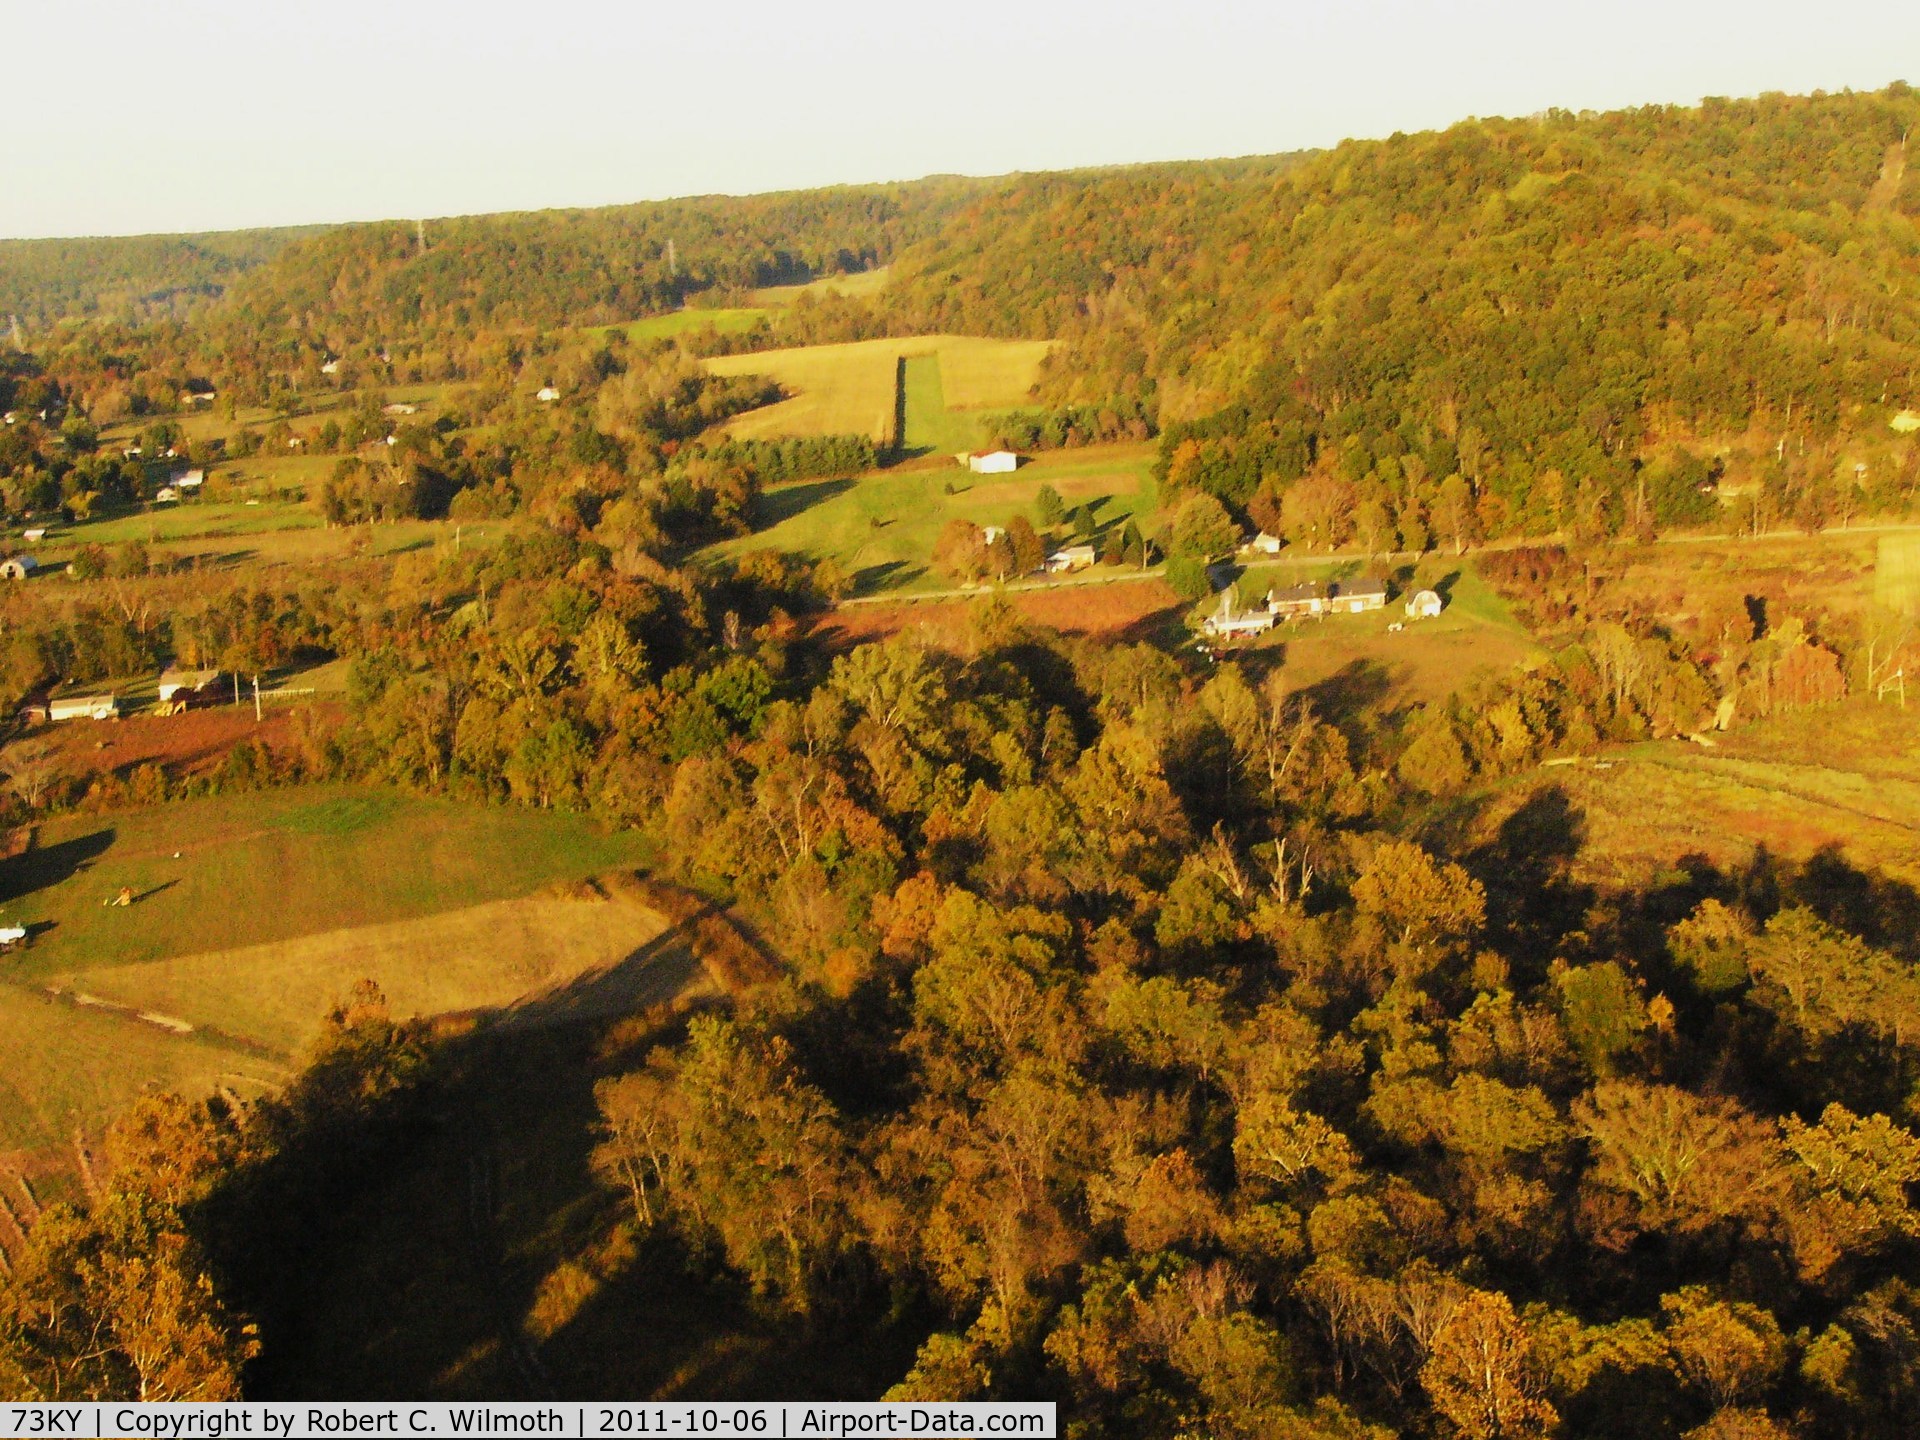 Brooks Field Airport (73KY) - Approaching from the SW on a long final for RWY 6 on this gorgeous autumn day in 2011.